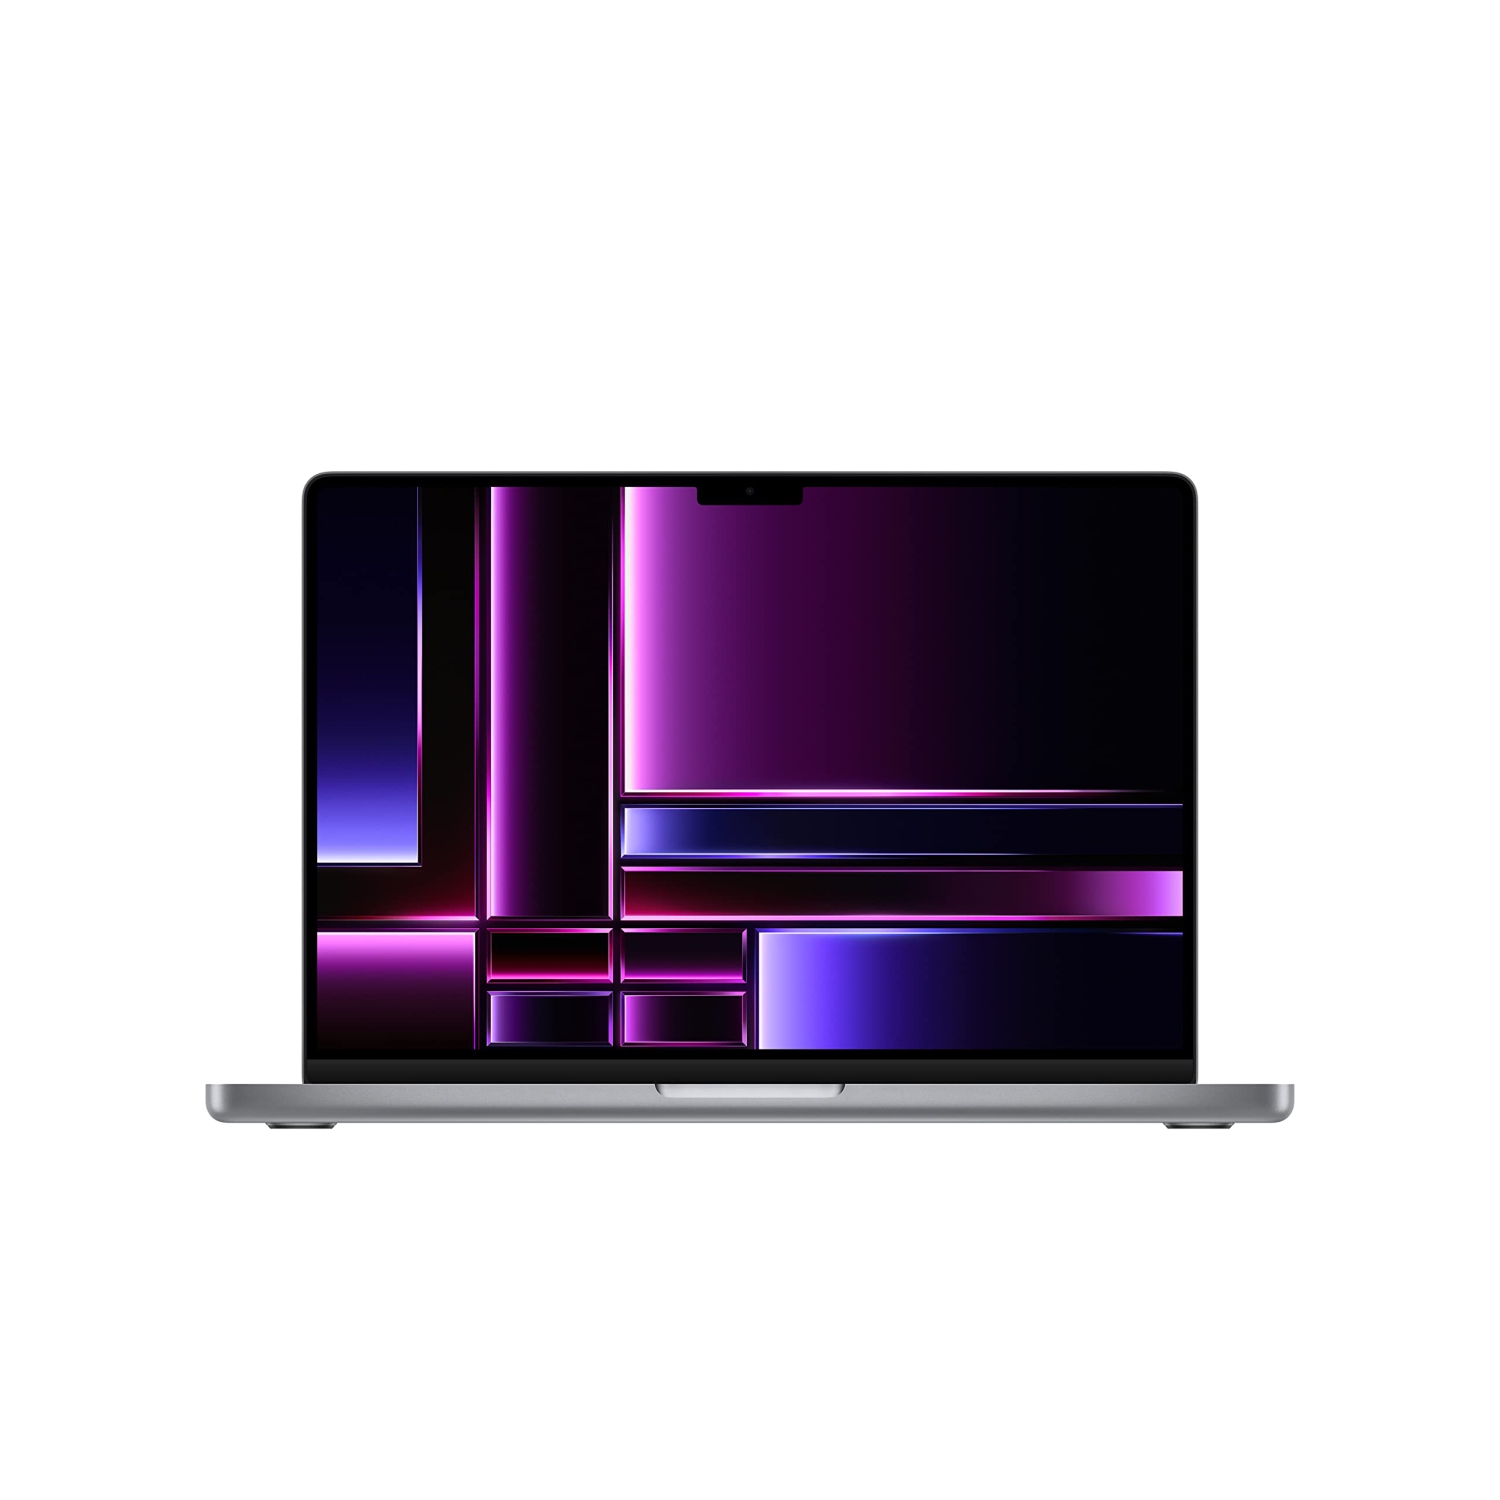 Refurbished (Excellent) - Apple 2023 MacBook Pro Laptop M2 Pro chip with 10‑core CPU and 16‑core GPU: 14.2-inch Liquid Retina XDR Display, 16GB Unified Memory, 512GB SSD Storage. W